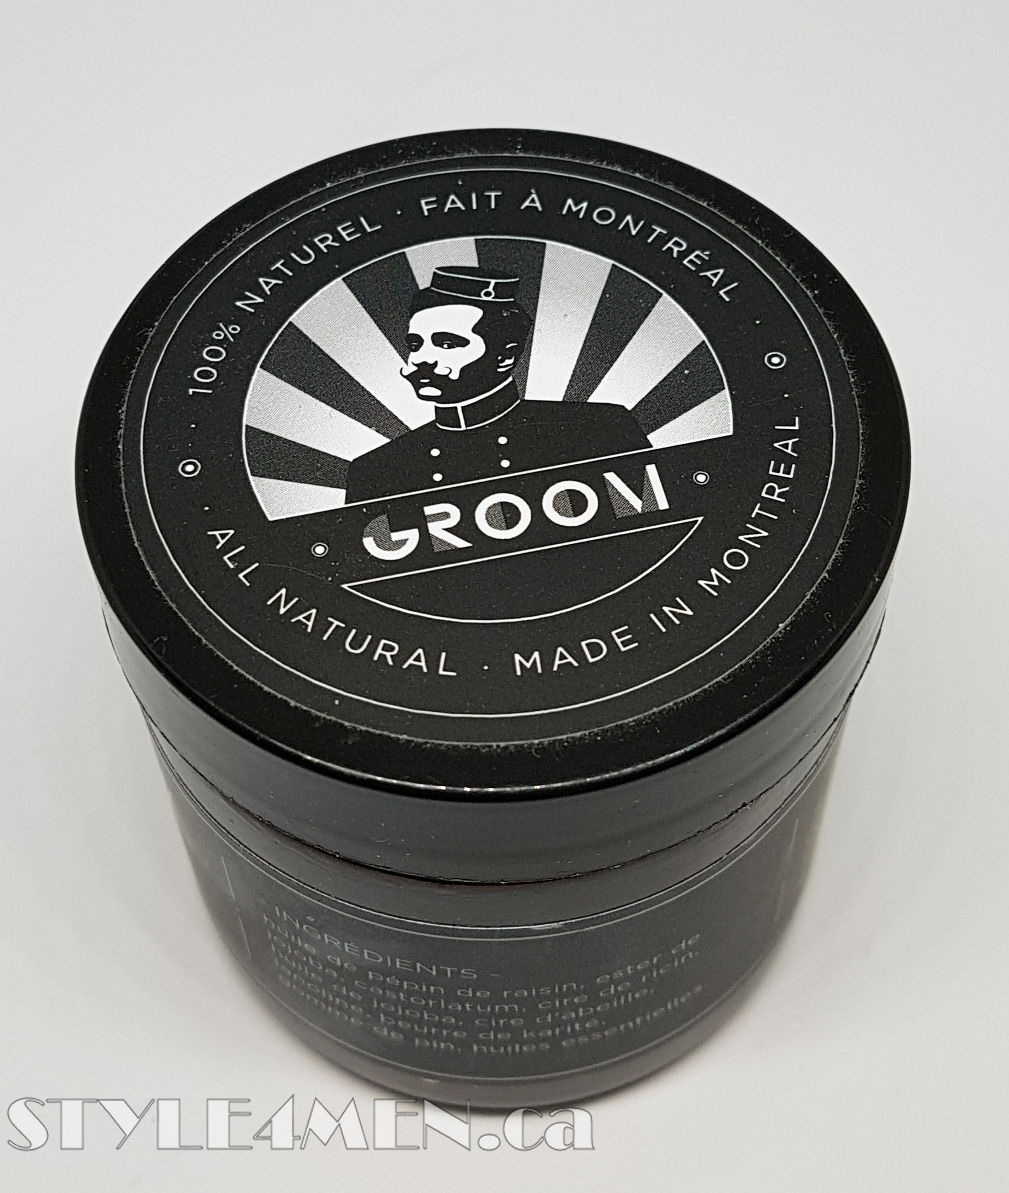 GROOM Hair pomade – A natural formulation for the slicked back look